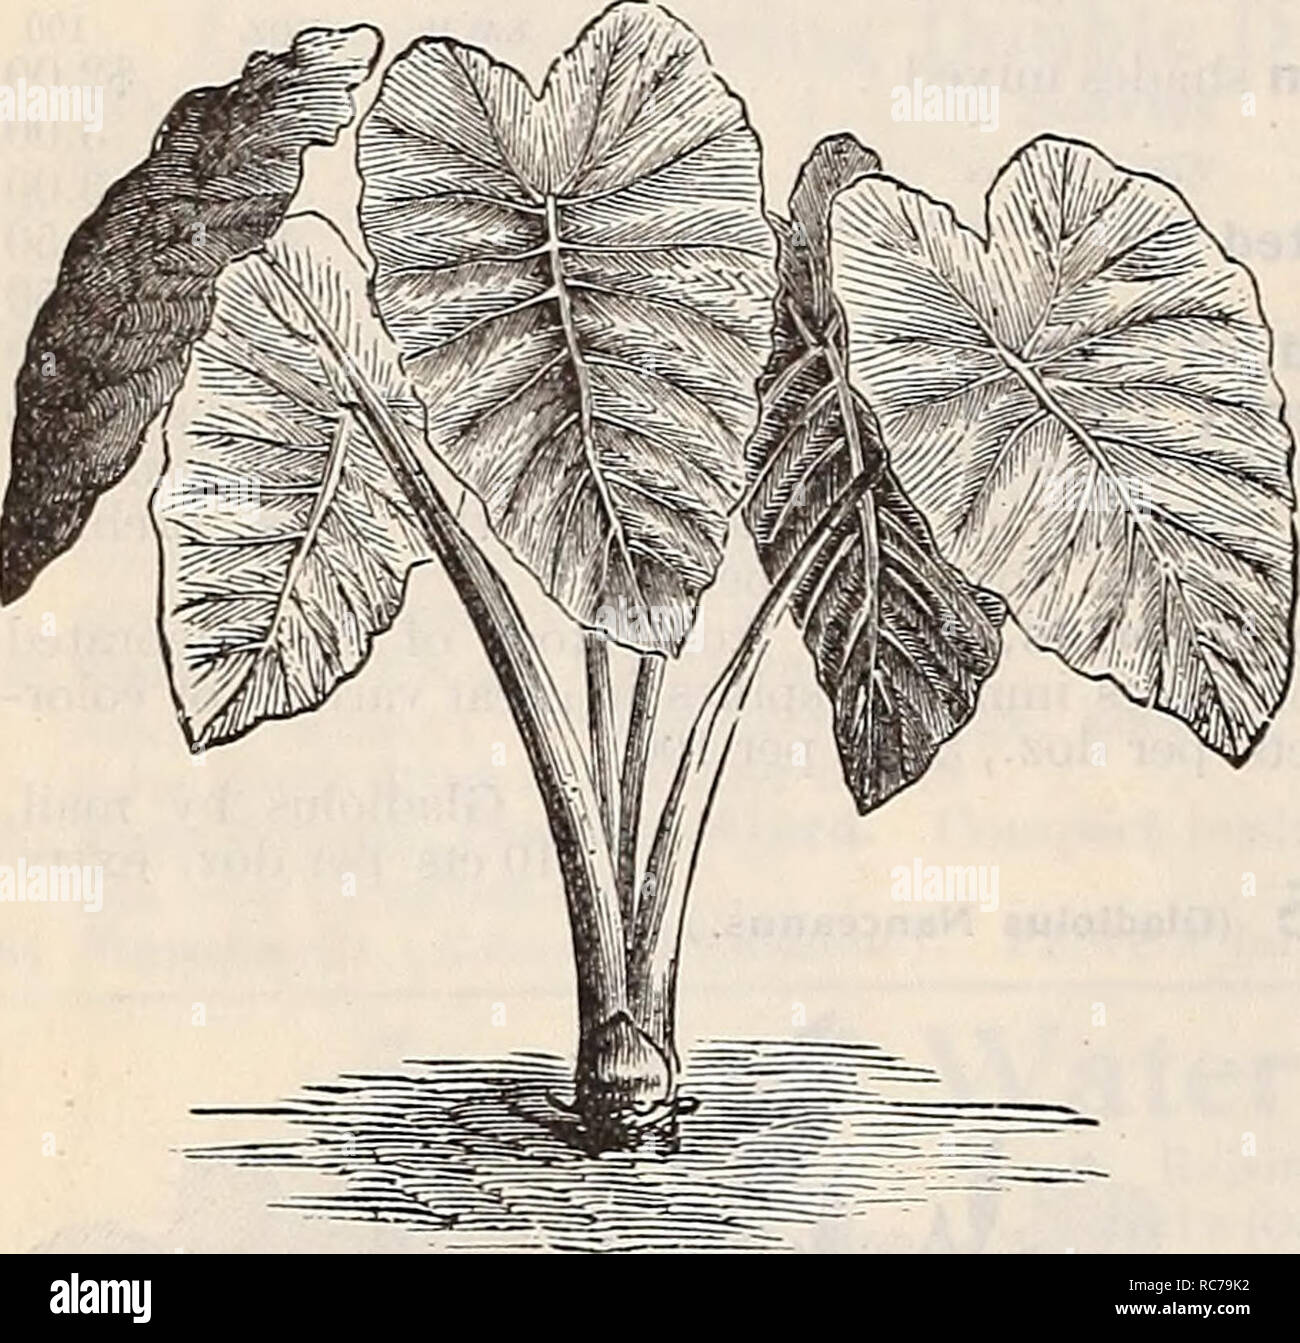 . Dreer's garden calendar : 1897. Seeds Catalogs; Nursery stock Catalogs; Gardening Equipment and supplies Catalogs; Flowers Seeds Catalogs; Vegetables Seeds Catalogs; Fruit Seeds Catalogs. 94 SUMMER FLOWERING BULBS. Amorphophallus Rivieri. Particularly handsome plant for growing either in clumps or as a soli- tary specimen. Should be planted in May in warm sunny situation in extra rich soil; the flowers appear before the leaves and rise to a height of 2 feet and resembles a gigantic black Calla. This is soon followed by the massive tropical looking leaves supported by thick beautifully marble Stock Photo